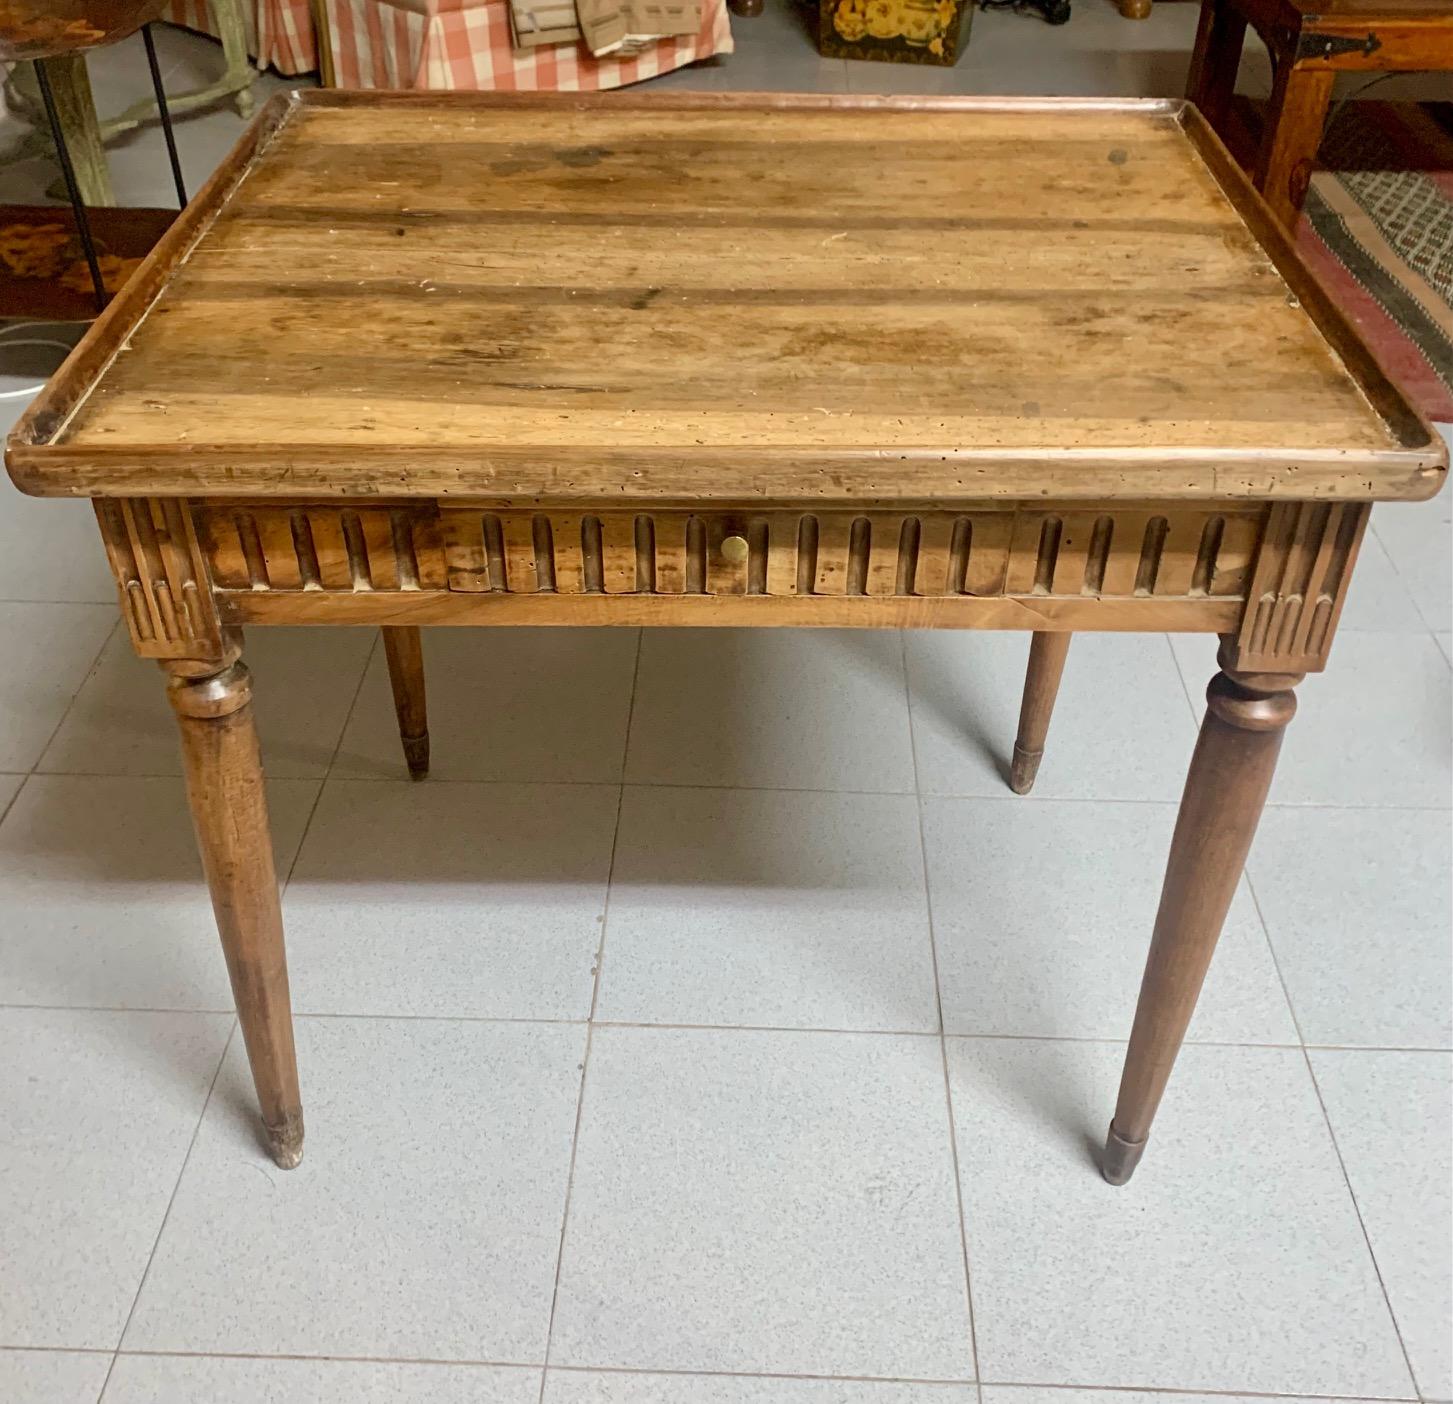 This early 19th century Louis XVI blond walnut side table features hand carvings on all four sides. Its beveled top rests on a fluted apron. from which four long conical turned legs protrude. The table has a single small drawer, it is an ideal table